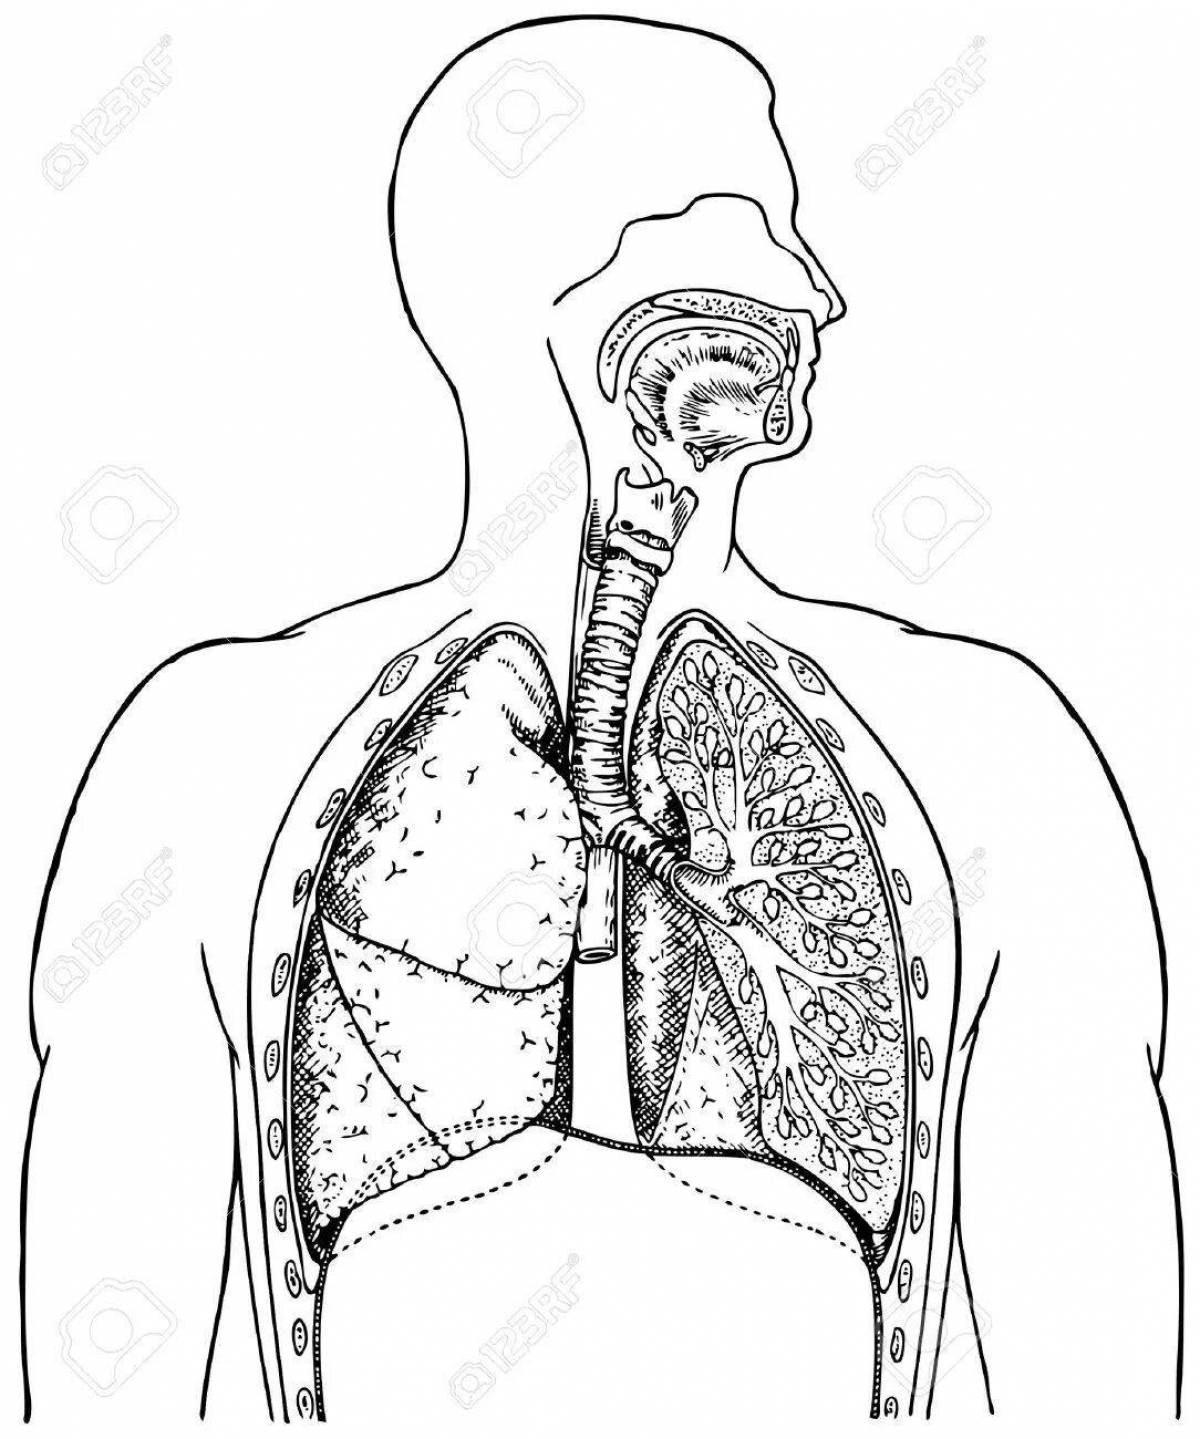 Creative respiratory system coloring page